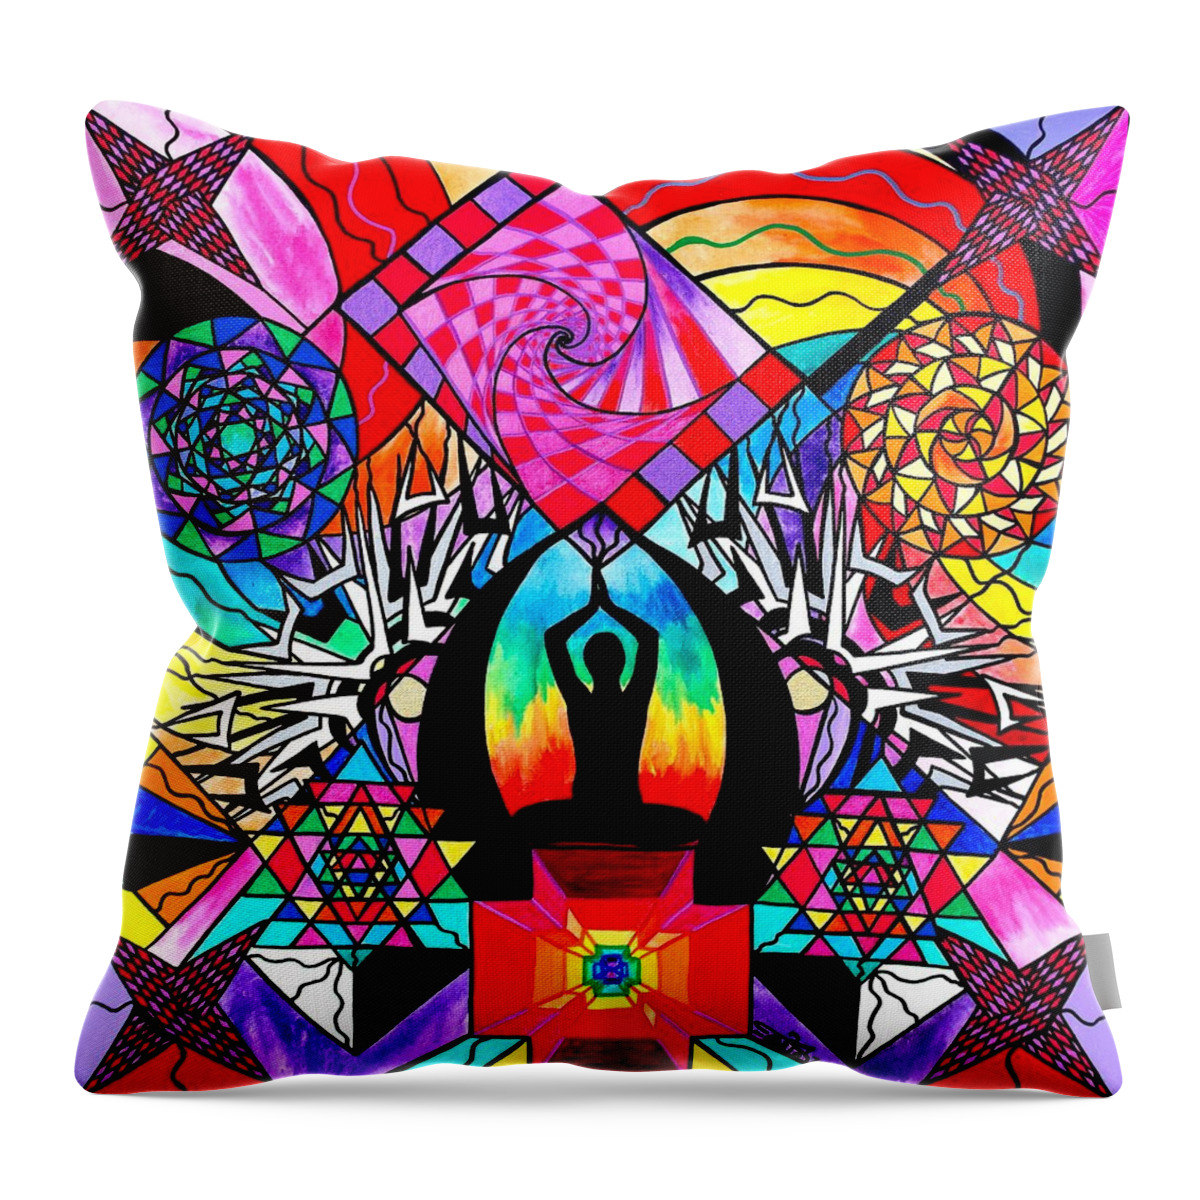 Vibration Throw Pillow featuring the painting Meditation Aid by Teal Eye Print Store